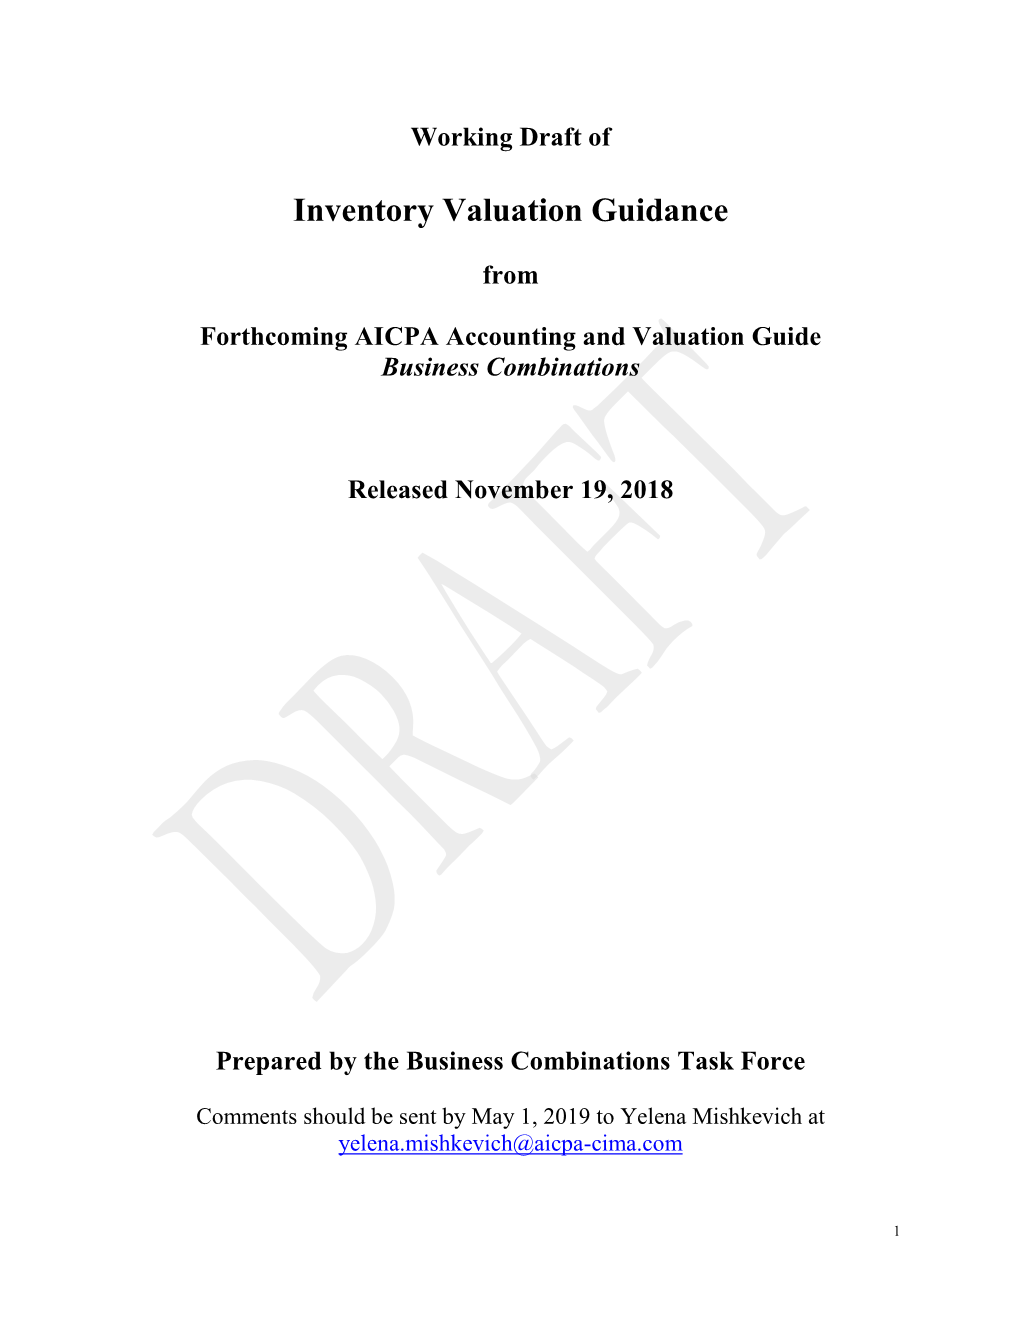 Inventory Valuation Guidance